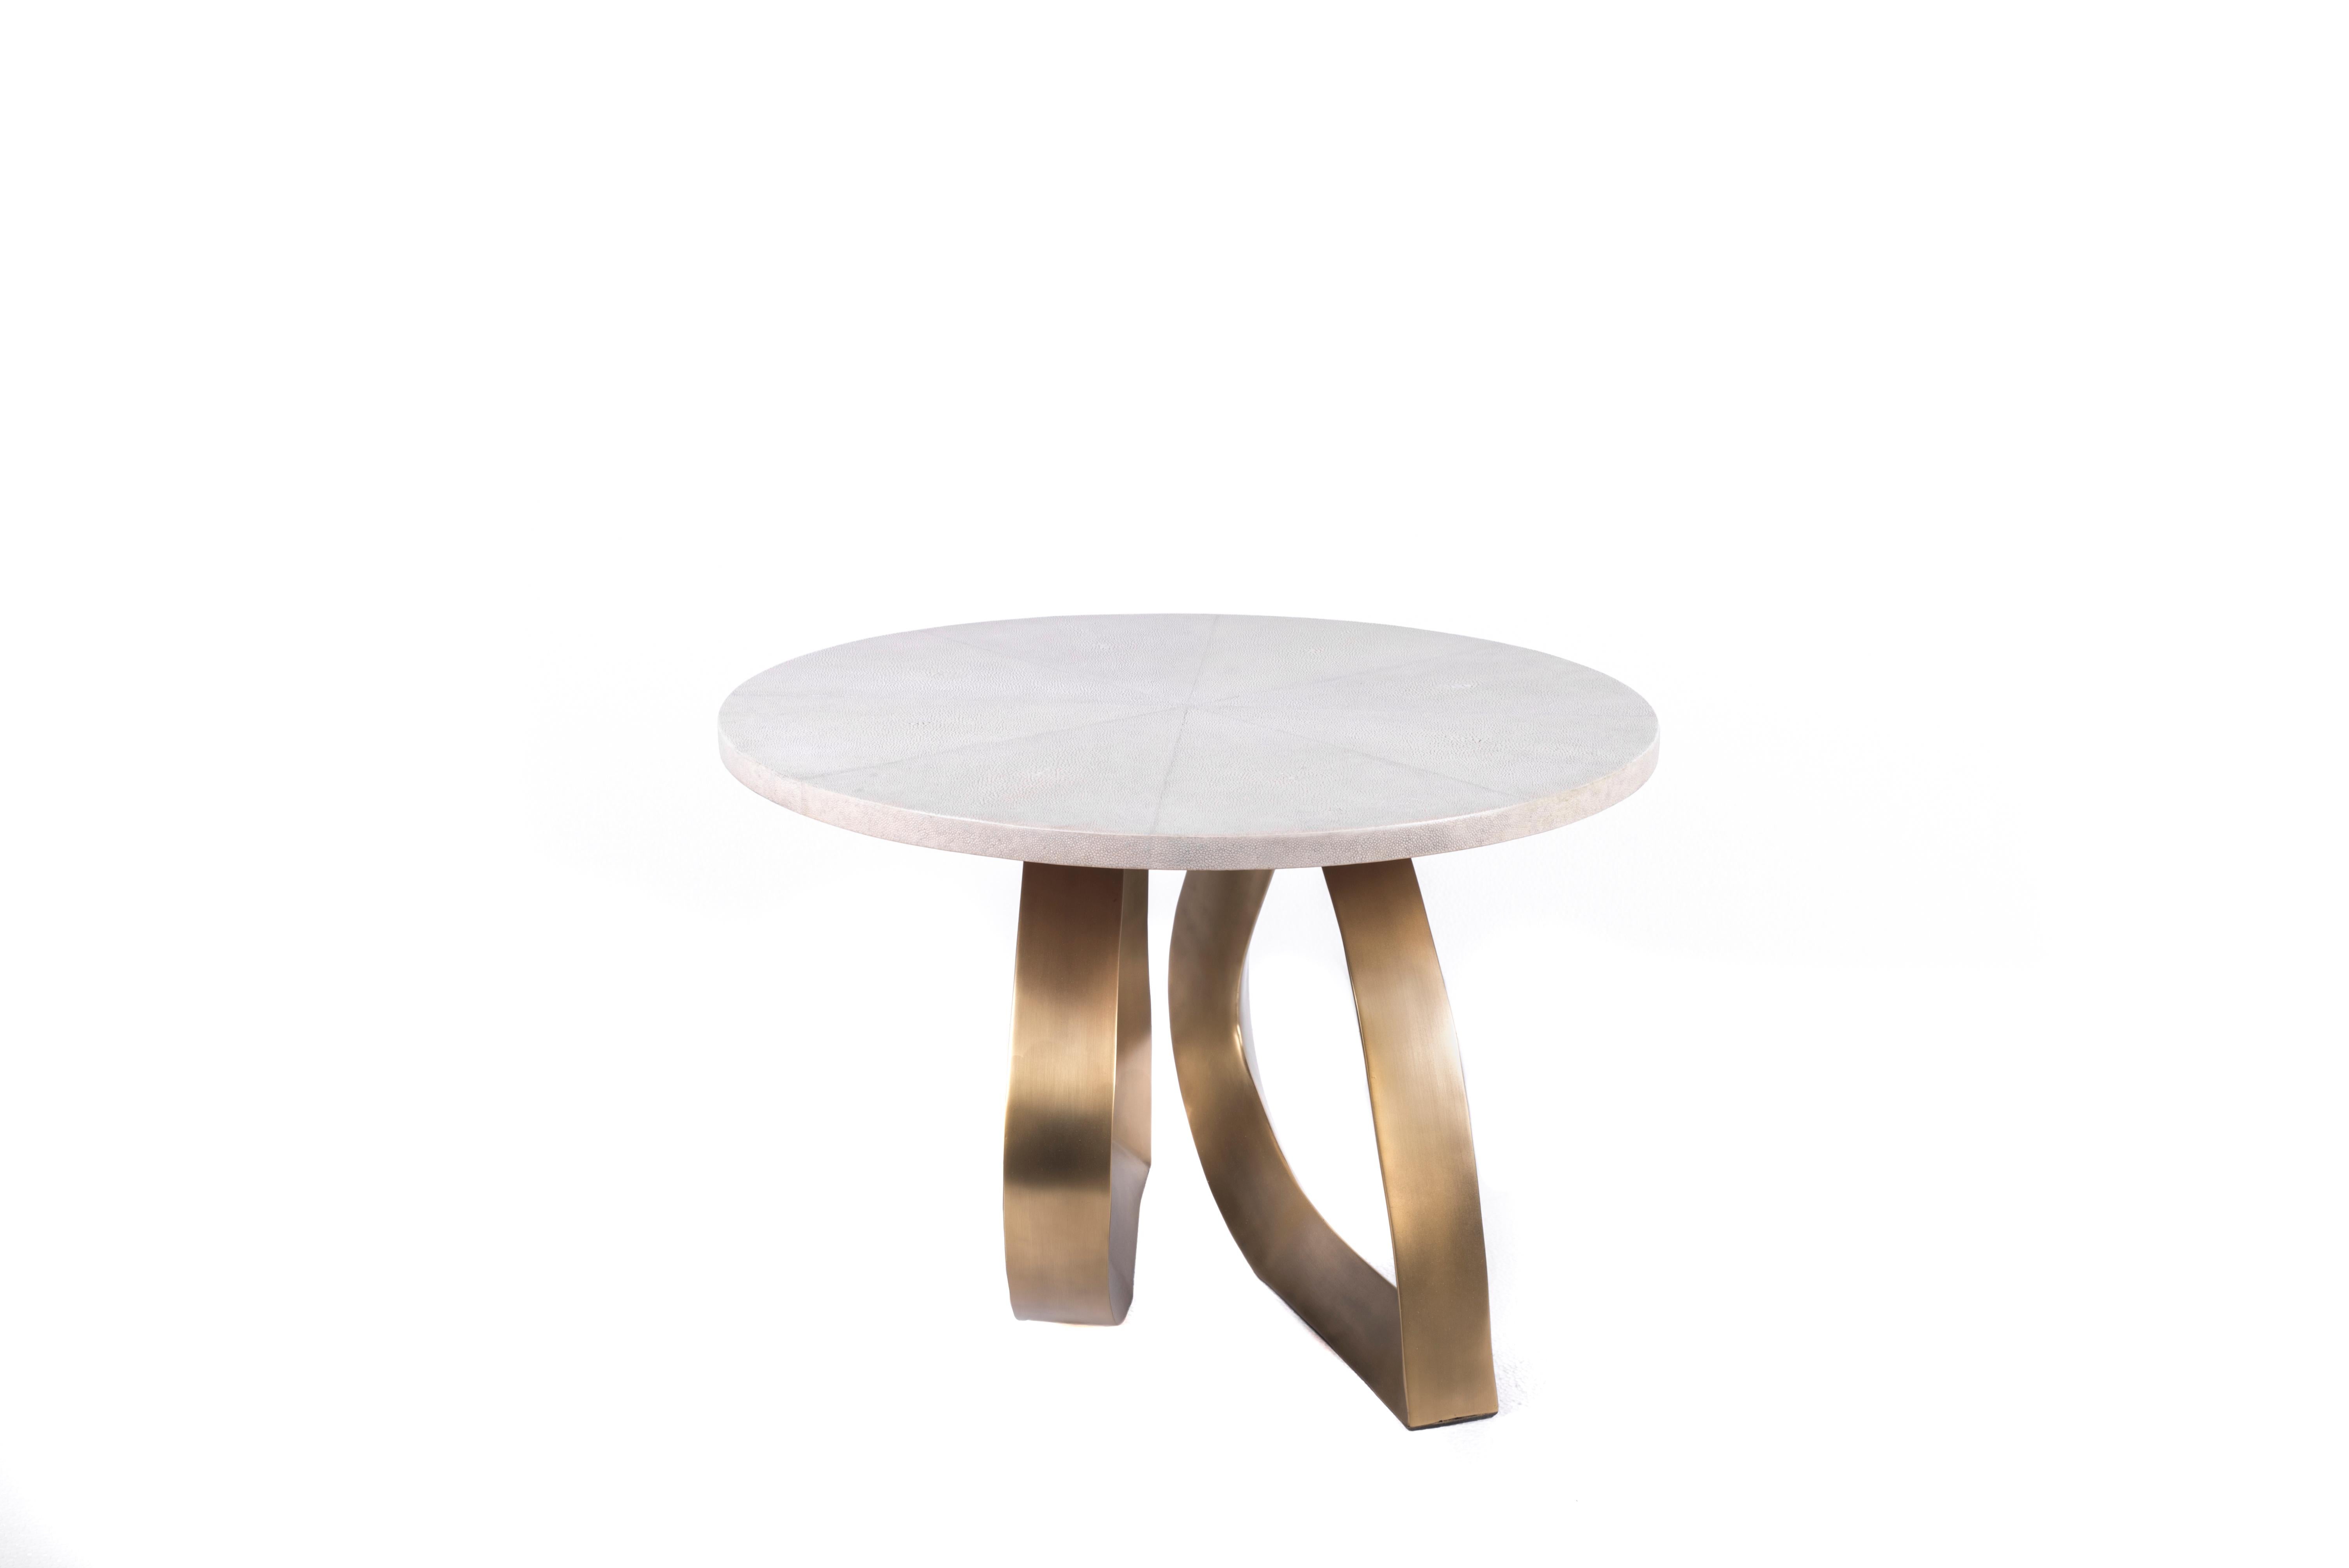 Contemporary Set of 2 Teardrop Nesting Coffee Tables, Cream Shagreen and Brass by Kifu Paris